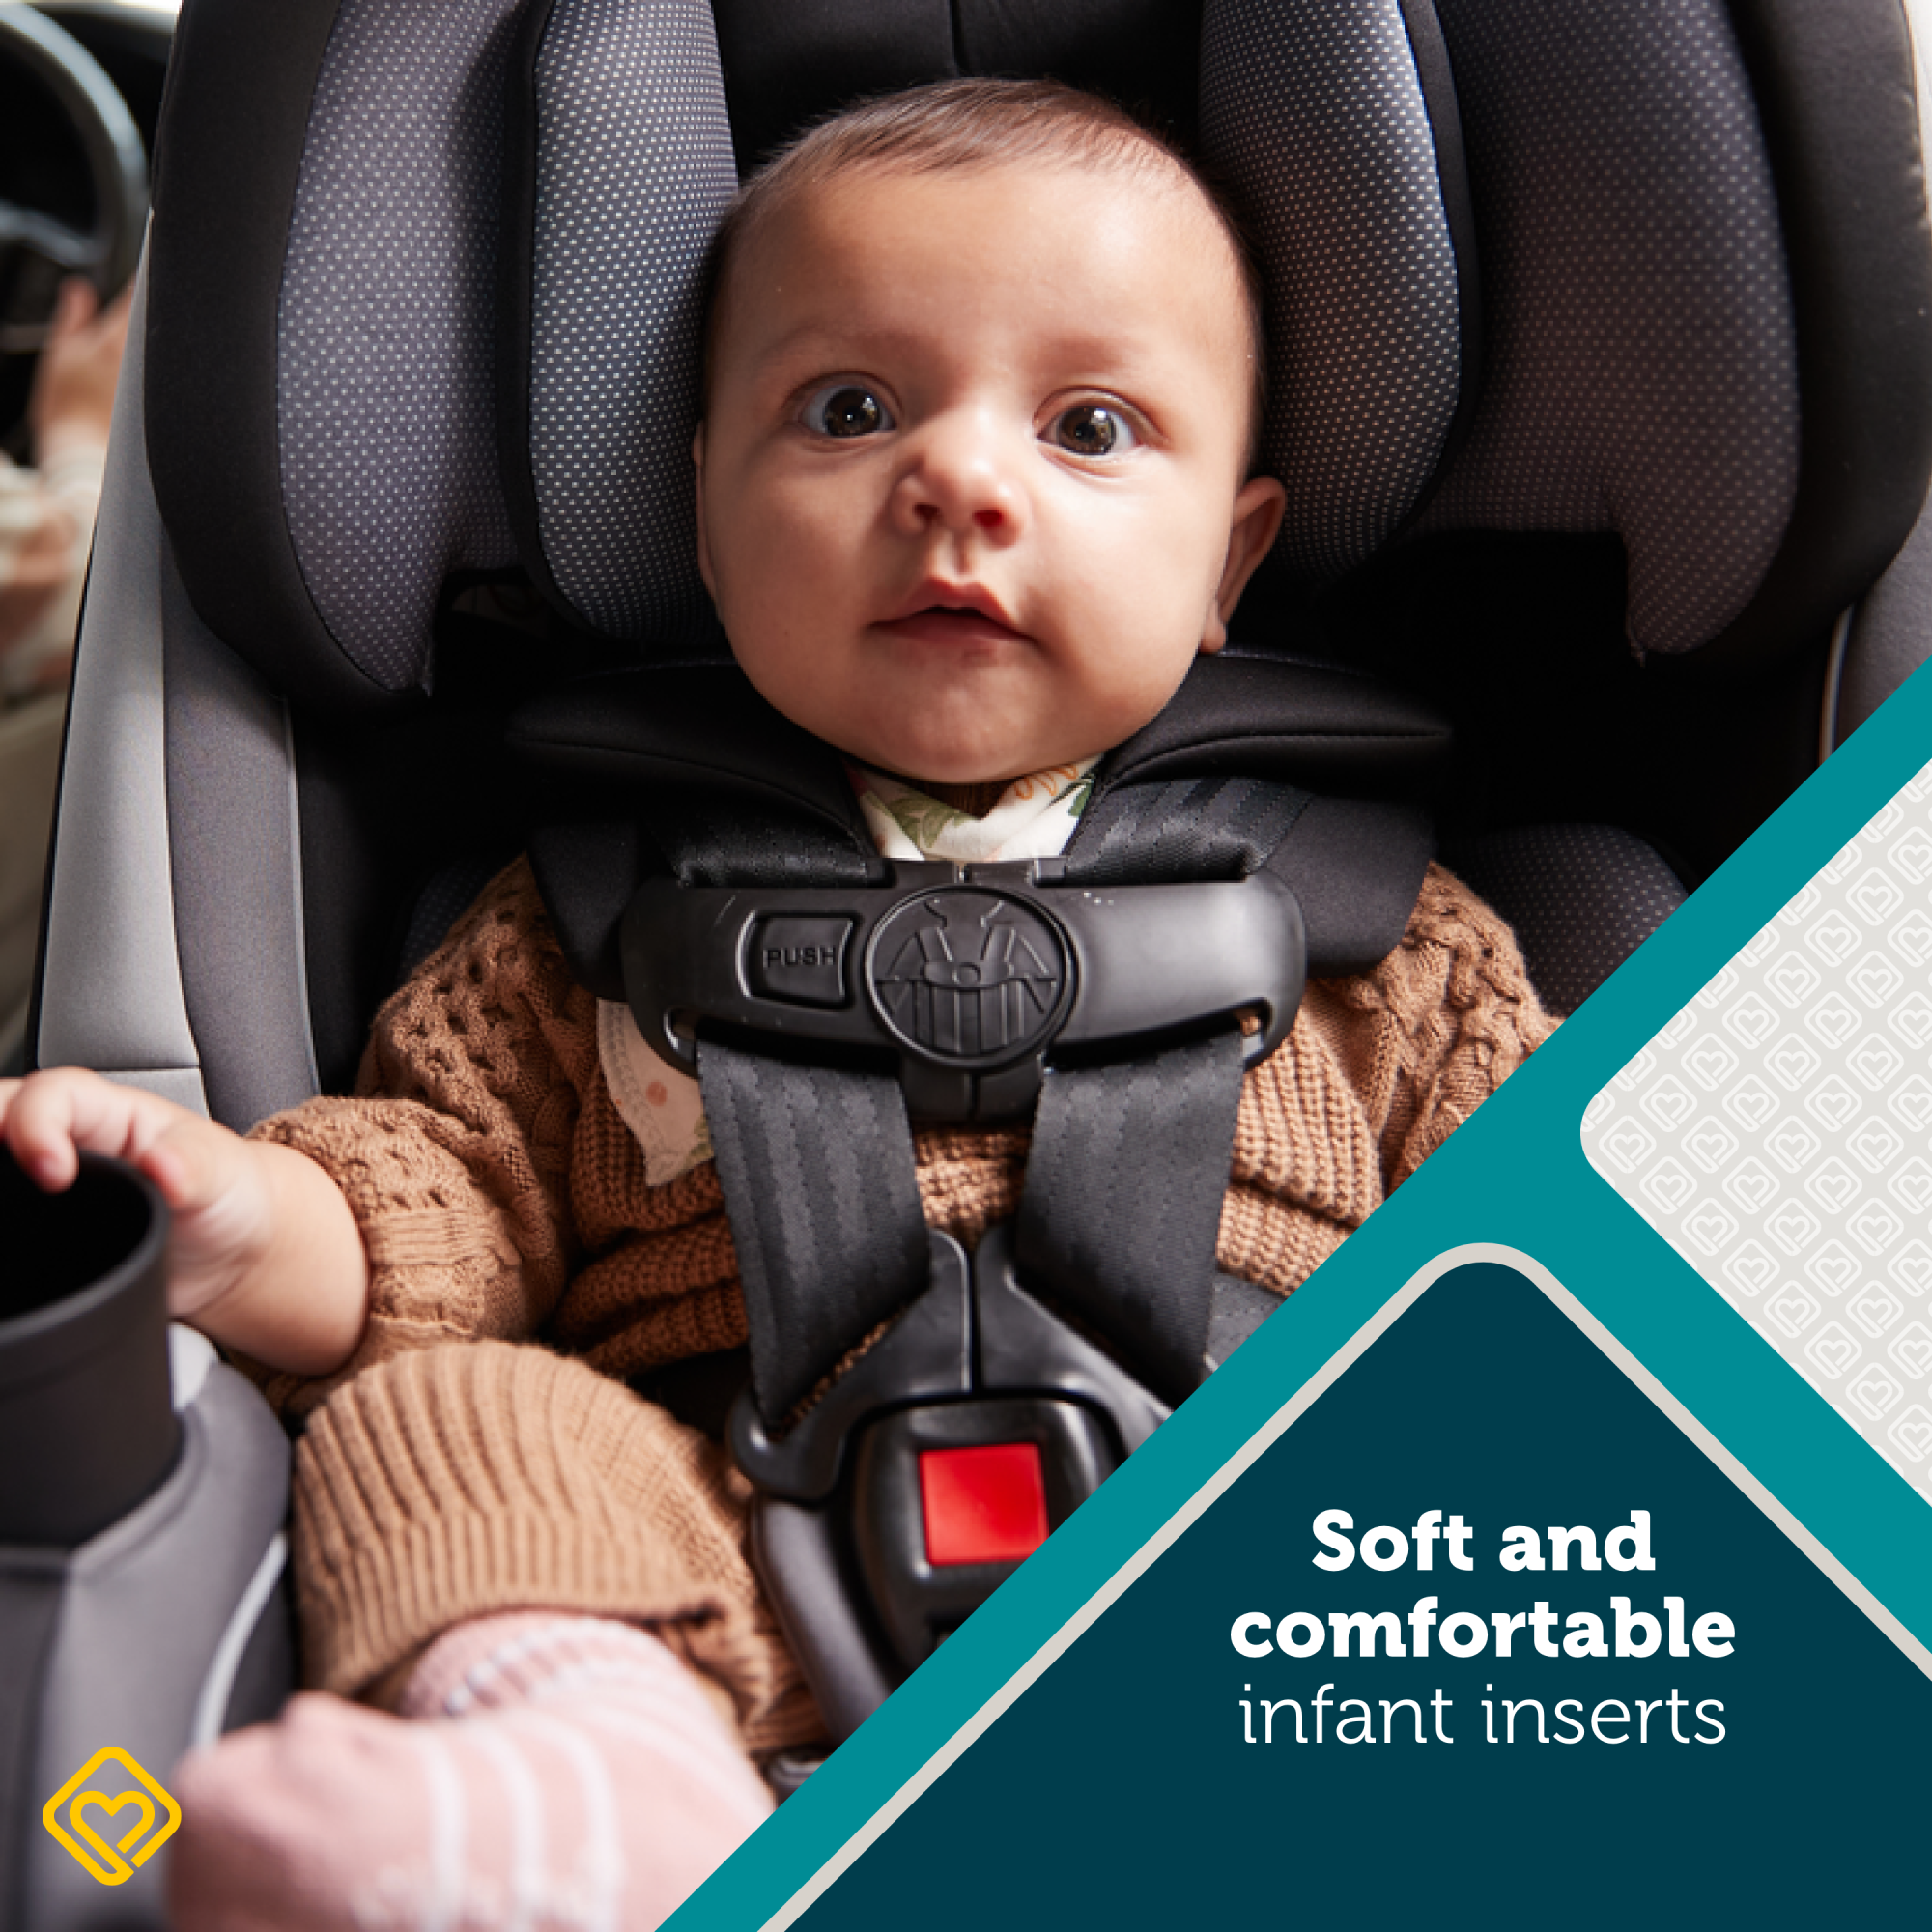 TriMate™ All-in-One Convertible Car Seat - soft and comfortable infant inserts